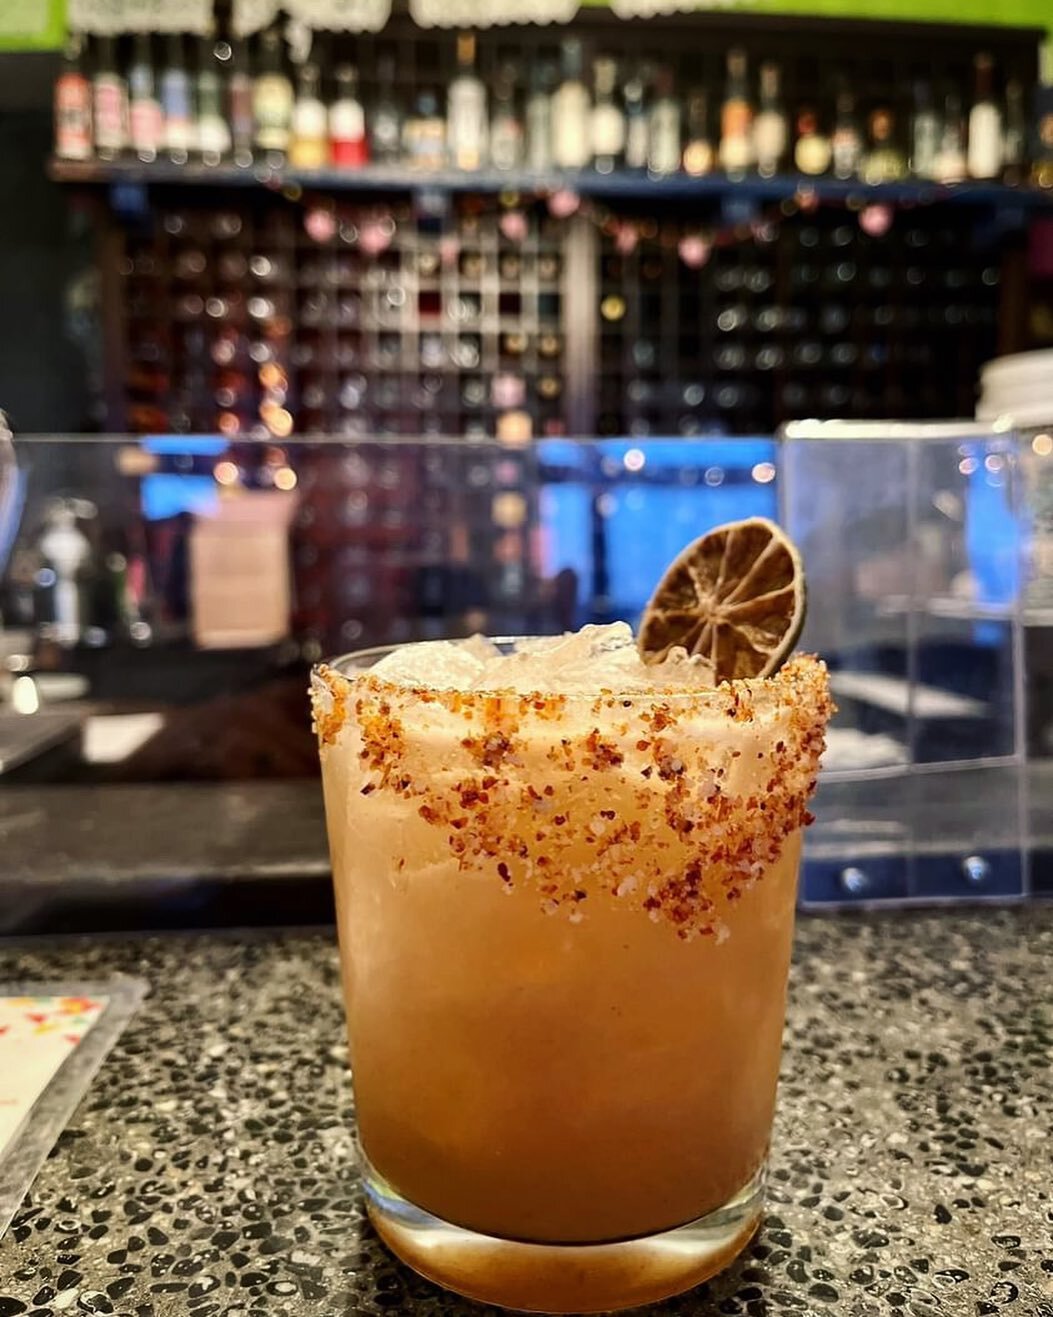 Margarita Monday is on friends!! 🍻 Come sip on one of these beautiful Tamarind Margarita features to celebrate! Fandango Mezcal (@mezcalfandango), Sons of Vancouver Quadruple Sec (@sonsofvancouver), fresh tamarind paste, fresh squeezed lime juice an